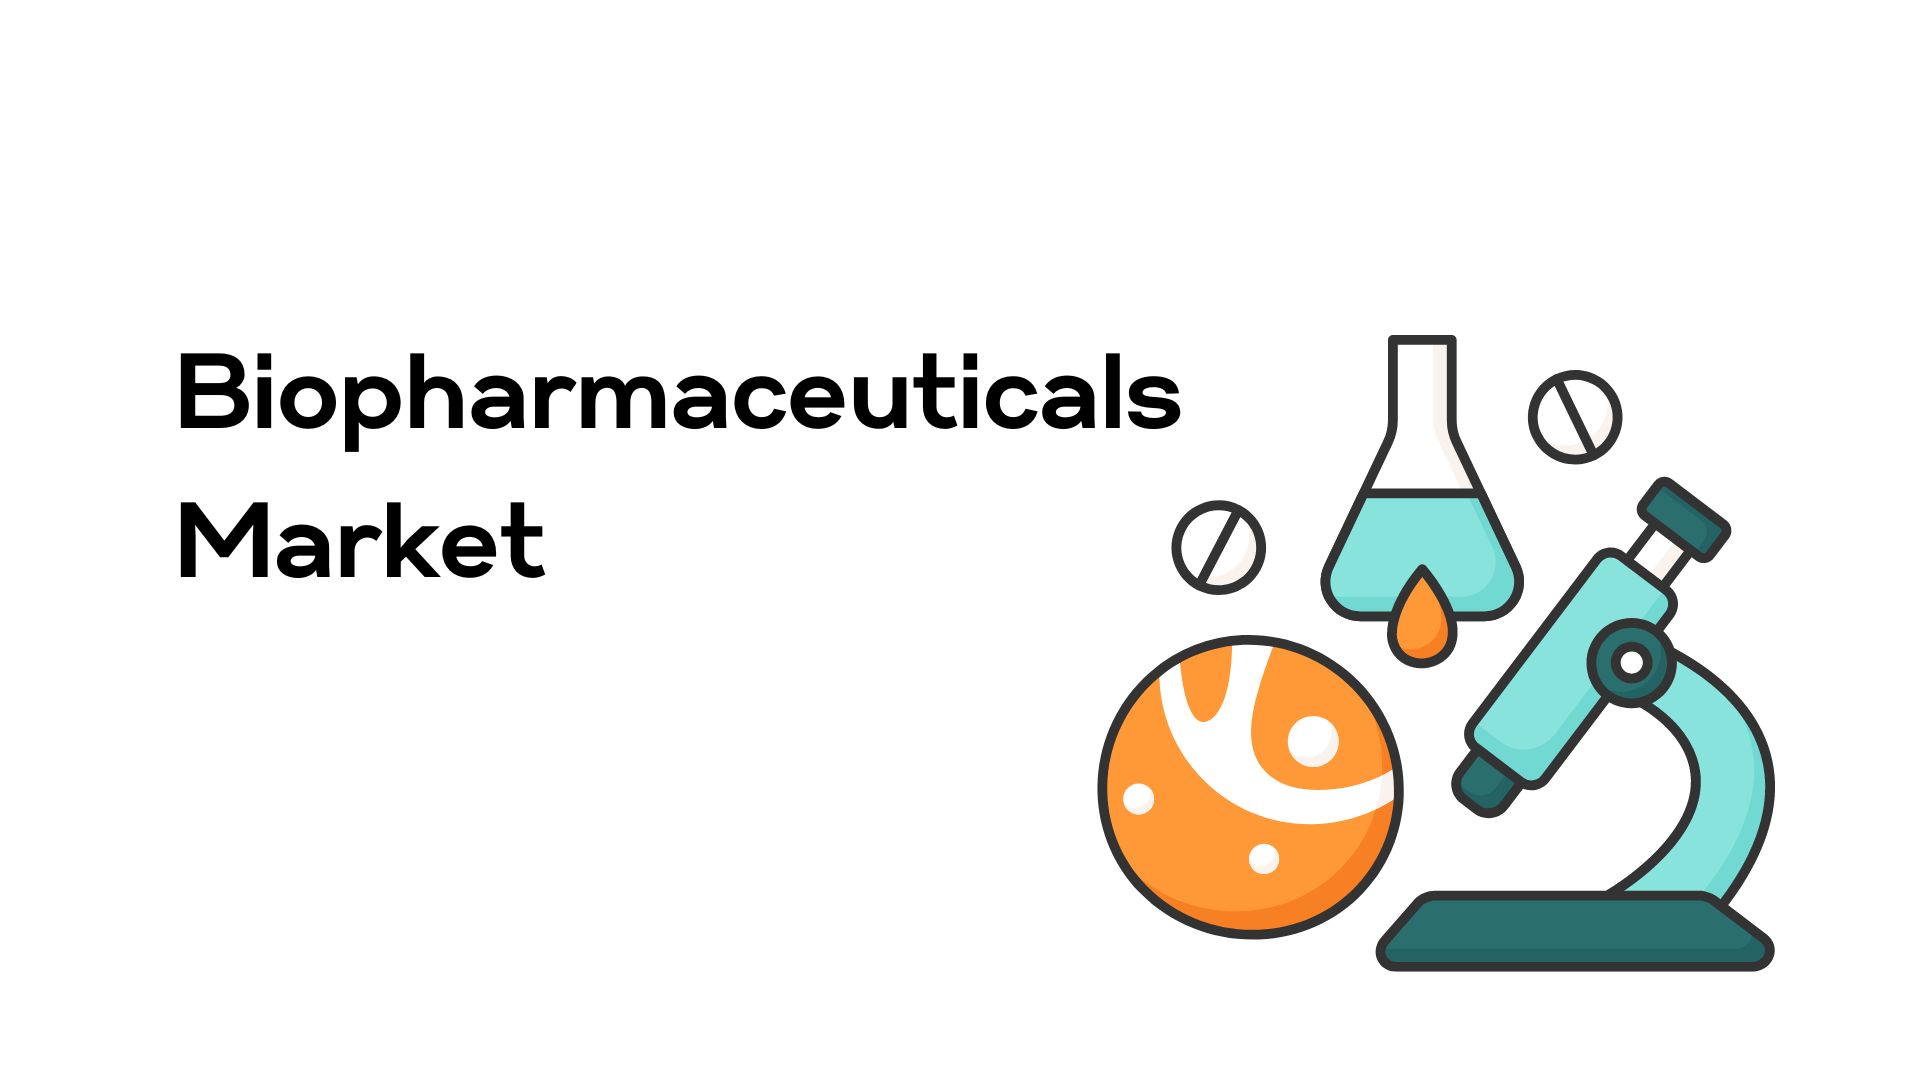 Biopharmaceuticals Market To Grow Steadily With An Impressive CAGR Of 8.2% From 2022 To 2032: Market.US